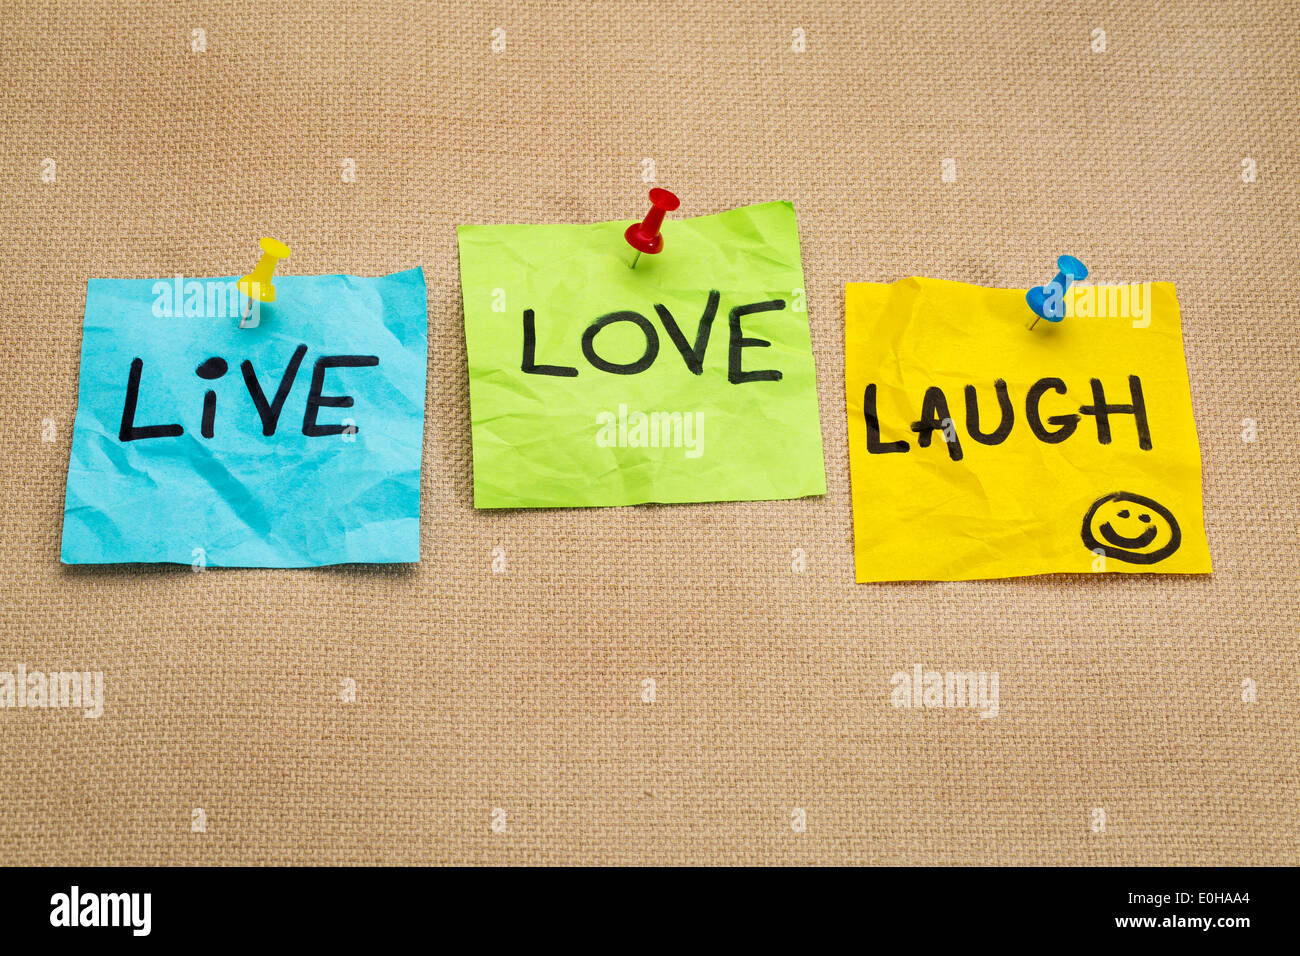 live, love, laugh - motivational words on sticky note reminders Stock Photo